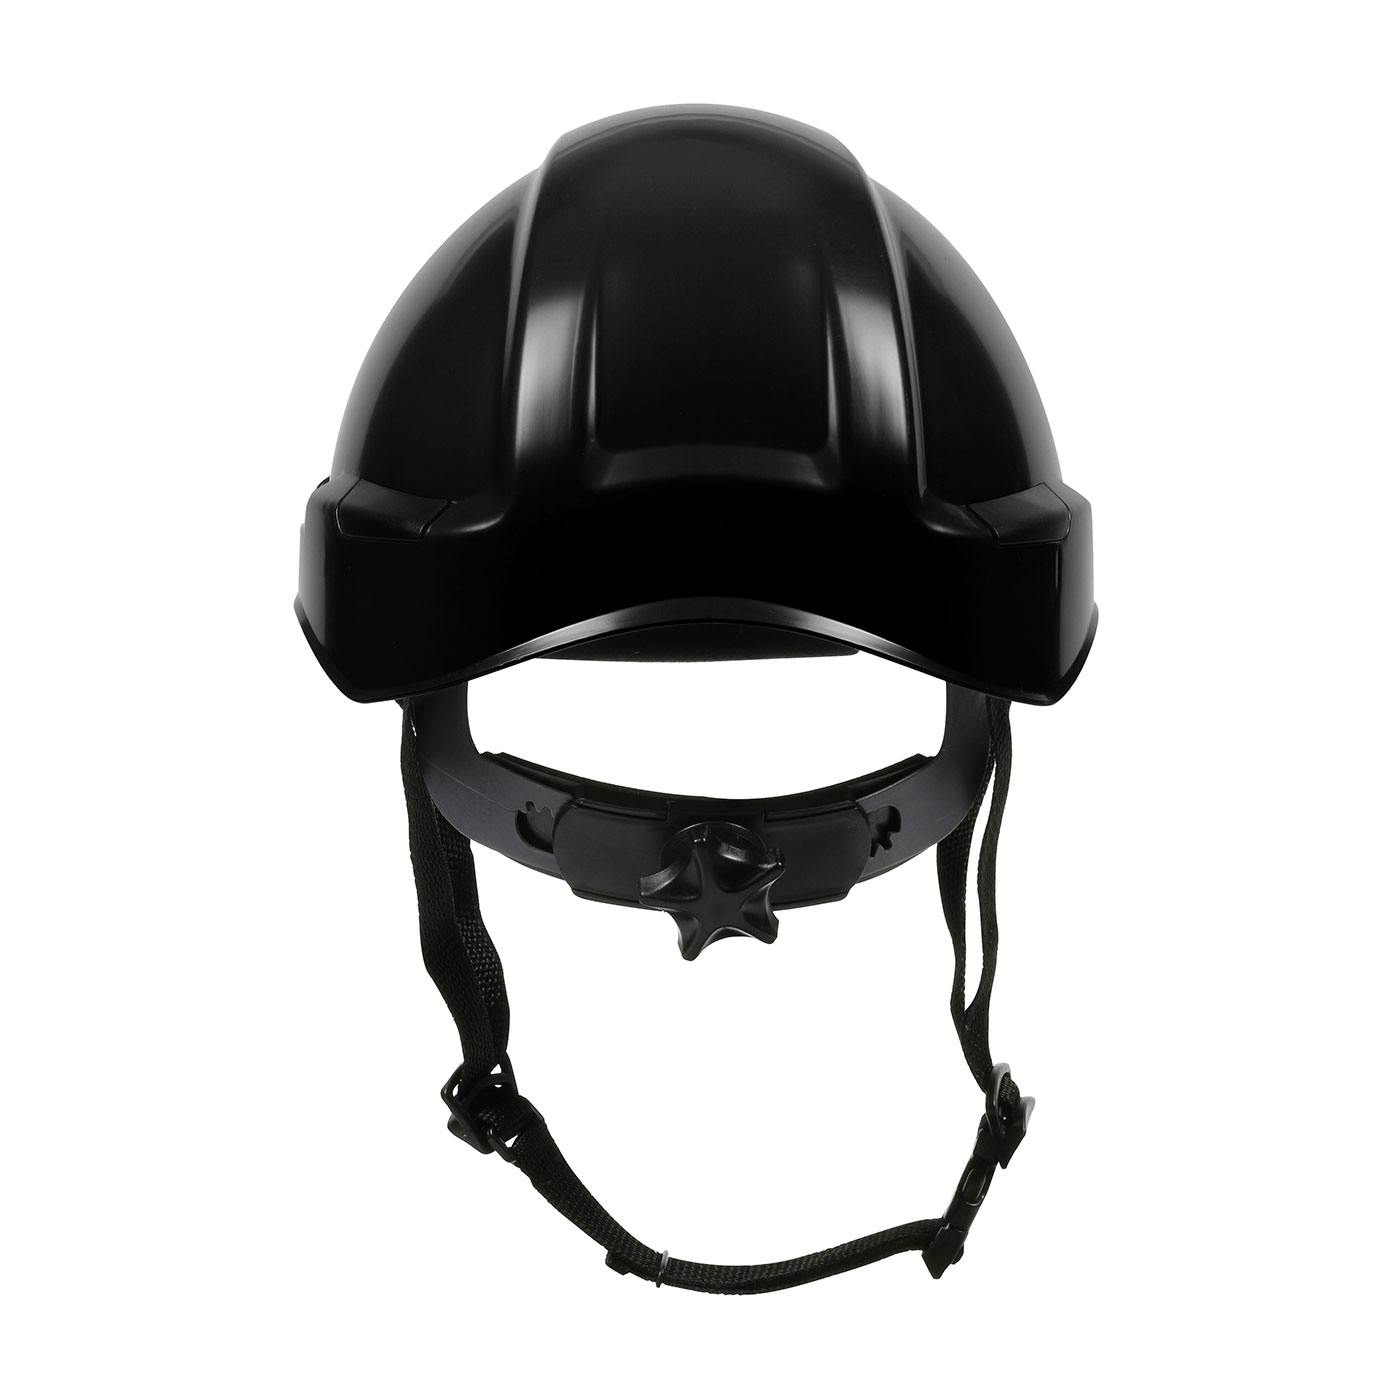 Rocky™ Industrial Climbing Helmet with Polycarbonate / ABS Shell, Hi-Density Foam Impact Liner, Nylon Suspension, Wheel Ratchet Adjustment and 4-Point Chin Strap (280-HP142R)_0